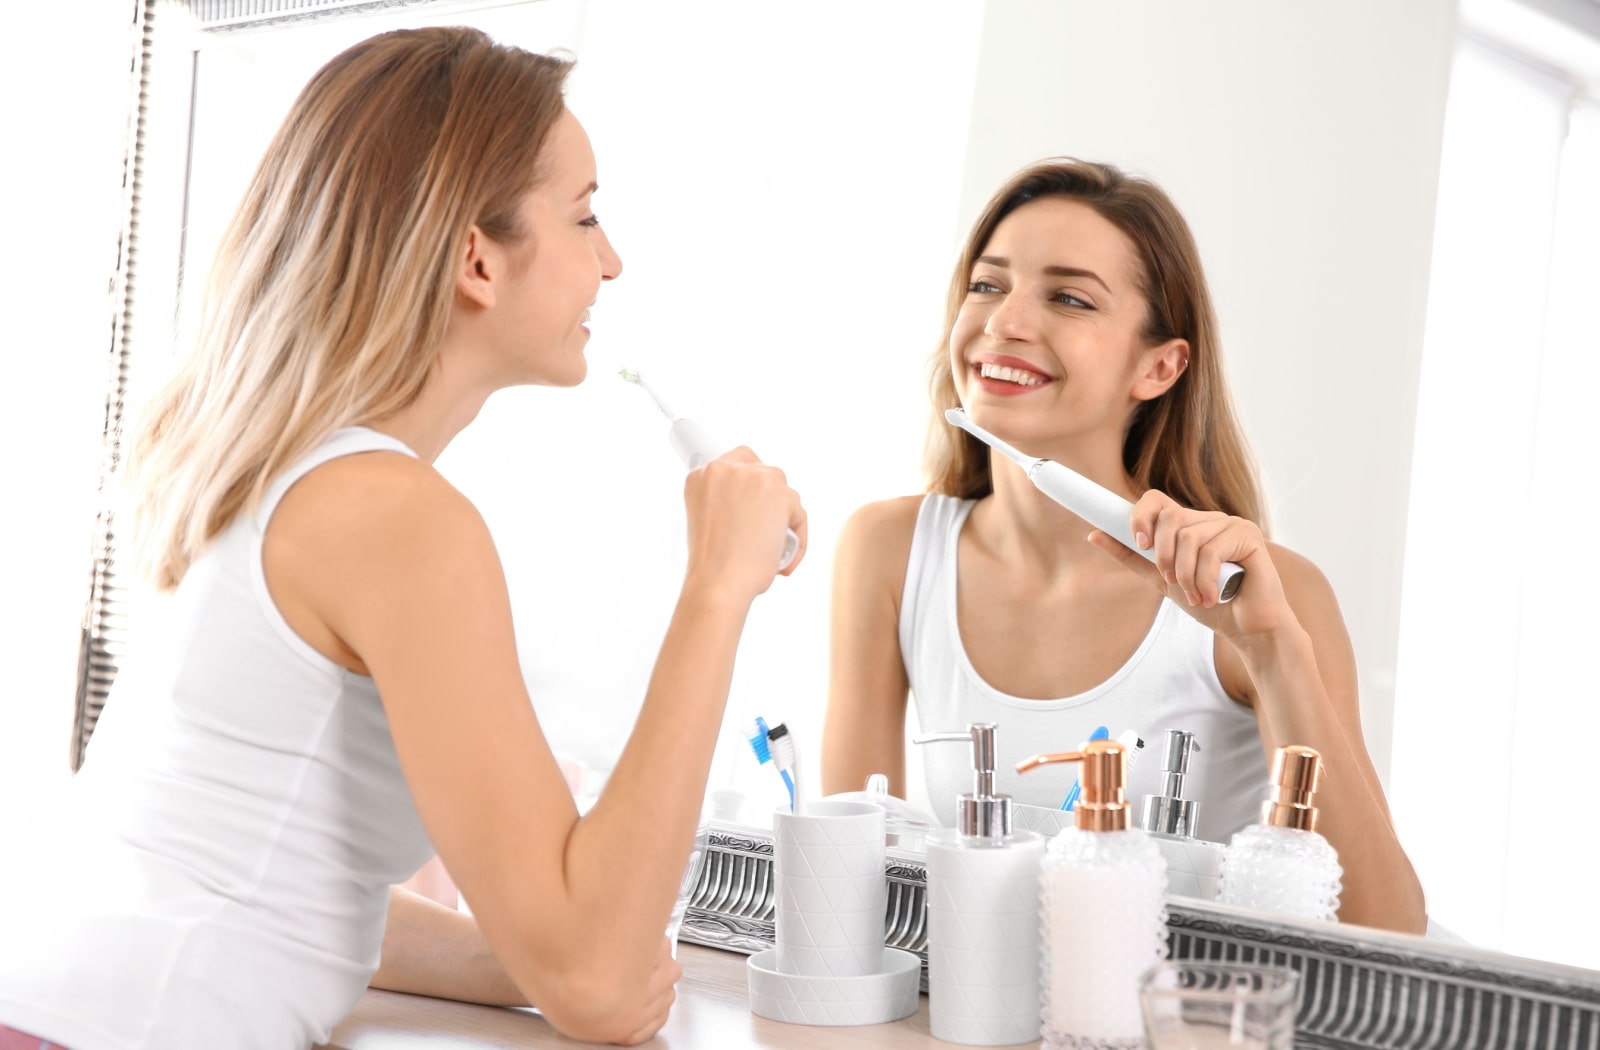 A woman looking into a bathroom mirror at herself while she is brushing her teeth with an electric toothbrush